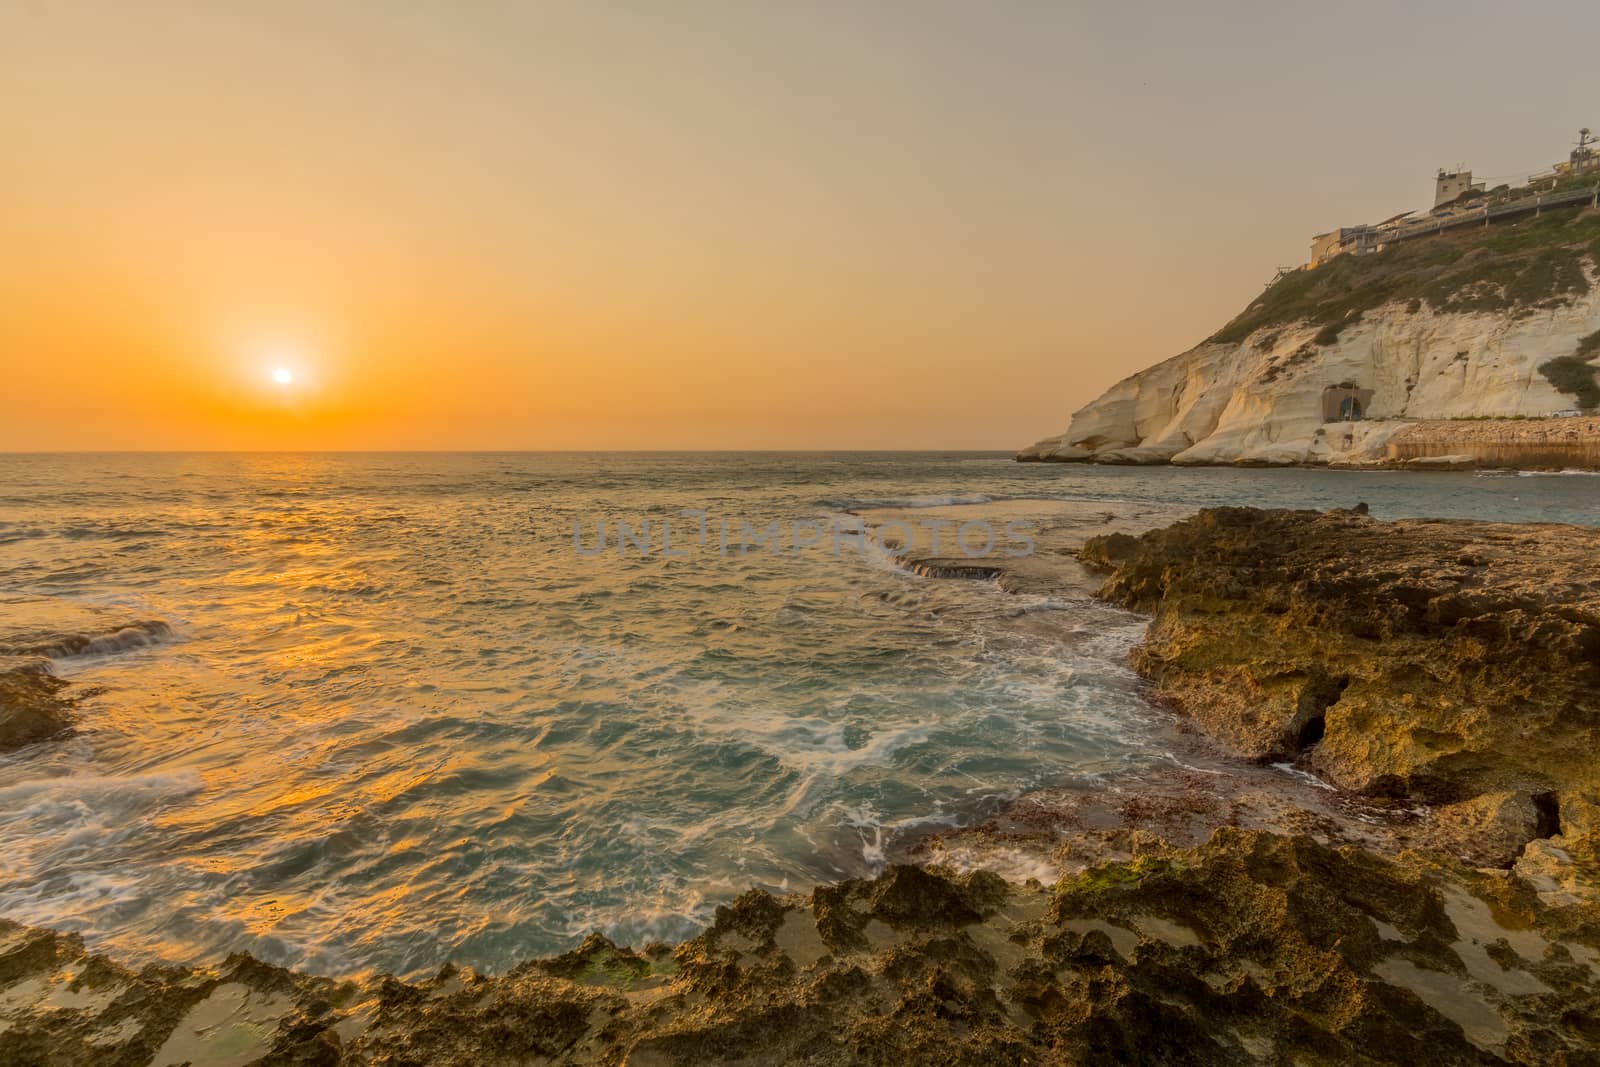 View of the sunset with the coast and cliffs of Rosh HaNikra, Northern Israel